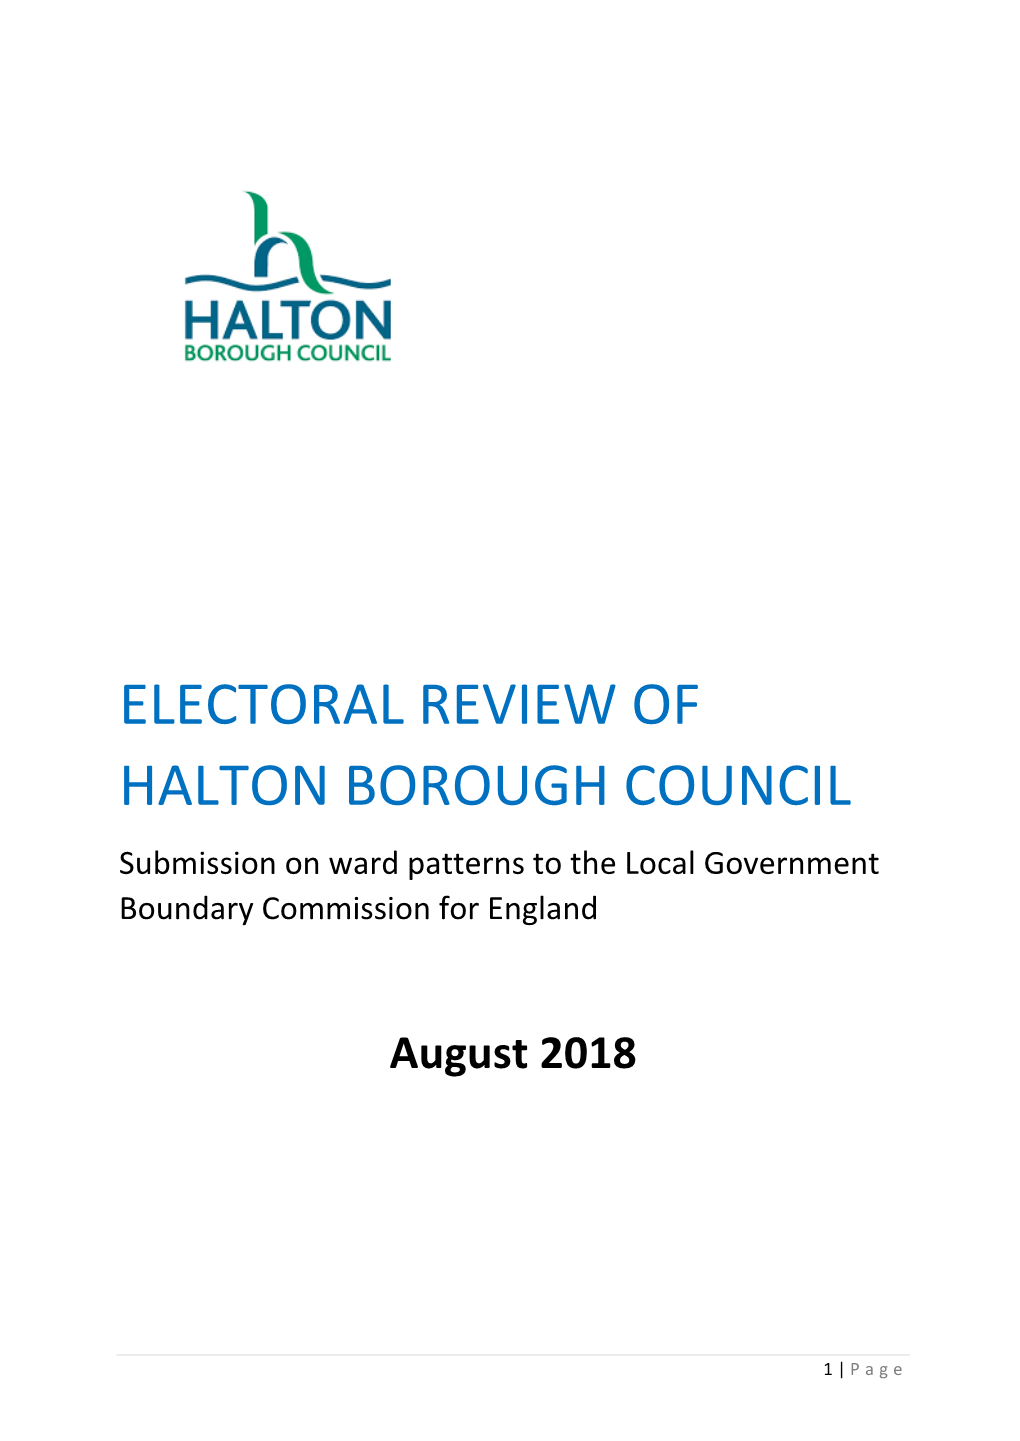 ELECTORAL REVIEW of HALTON BOROUGH COUNCIL Submission on Ward Patterns to the Local Government Boundary Commission for England